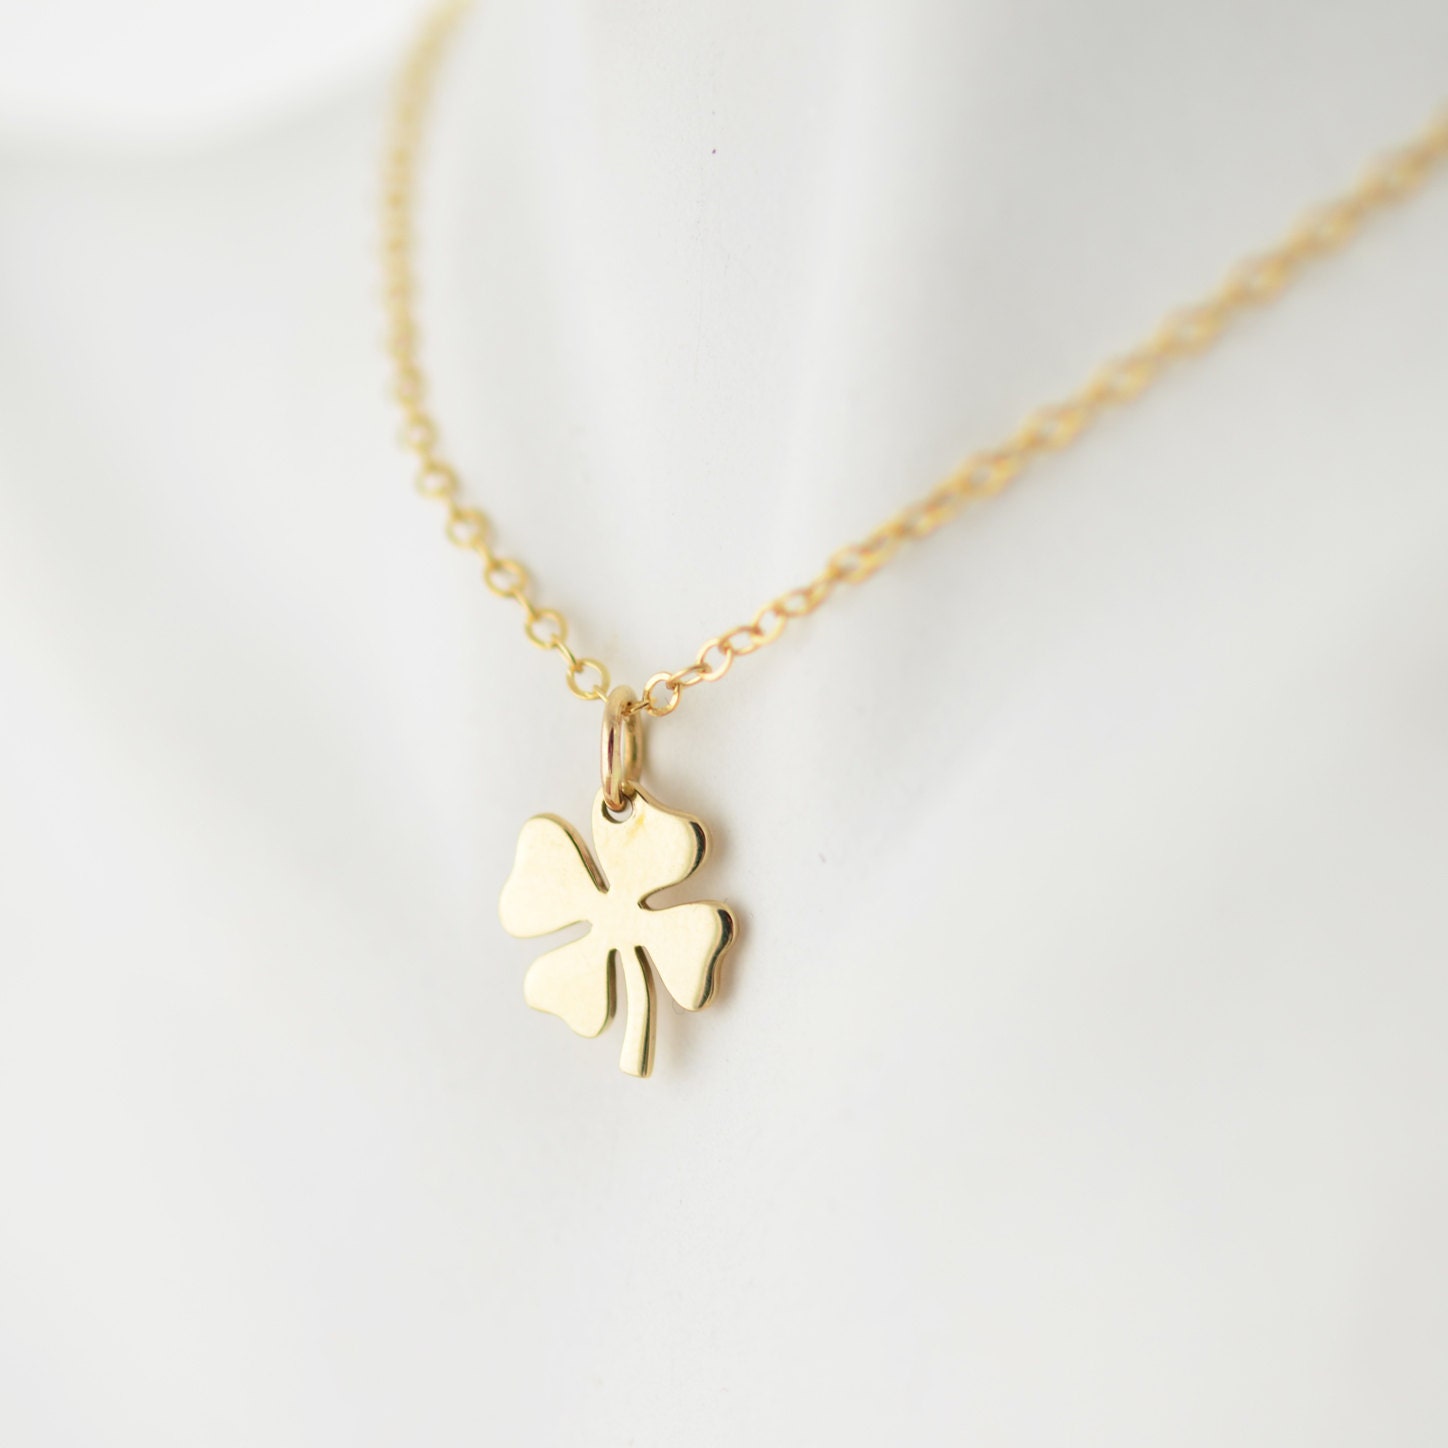 Womens good luck charm necklace,14k gold necklace, four leaf clover ...